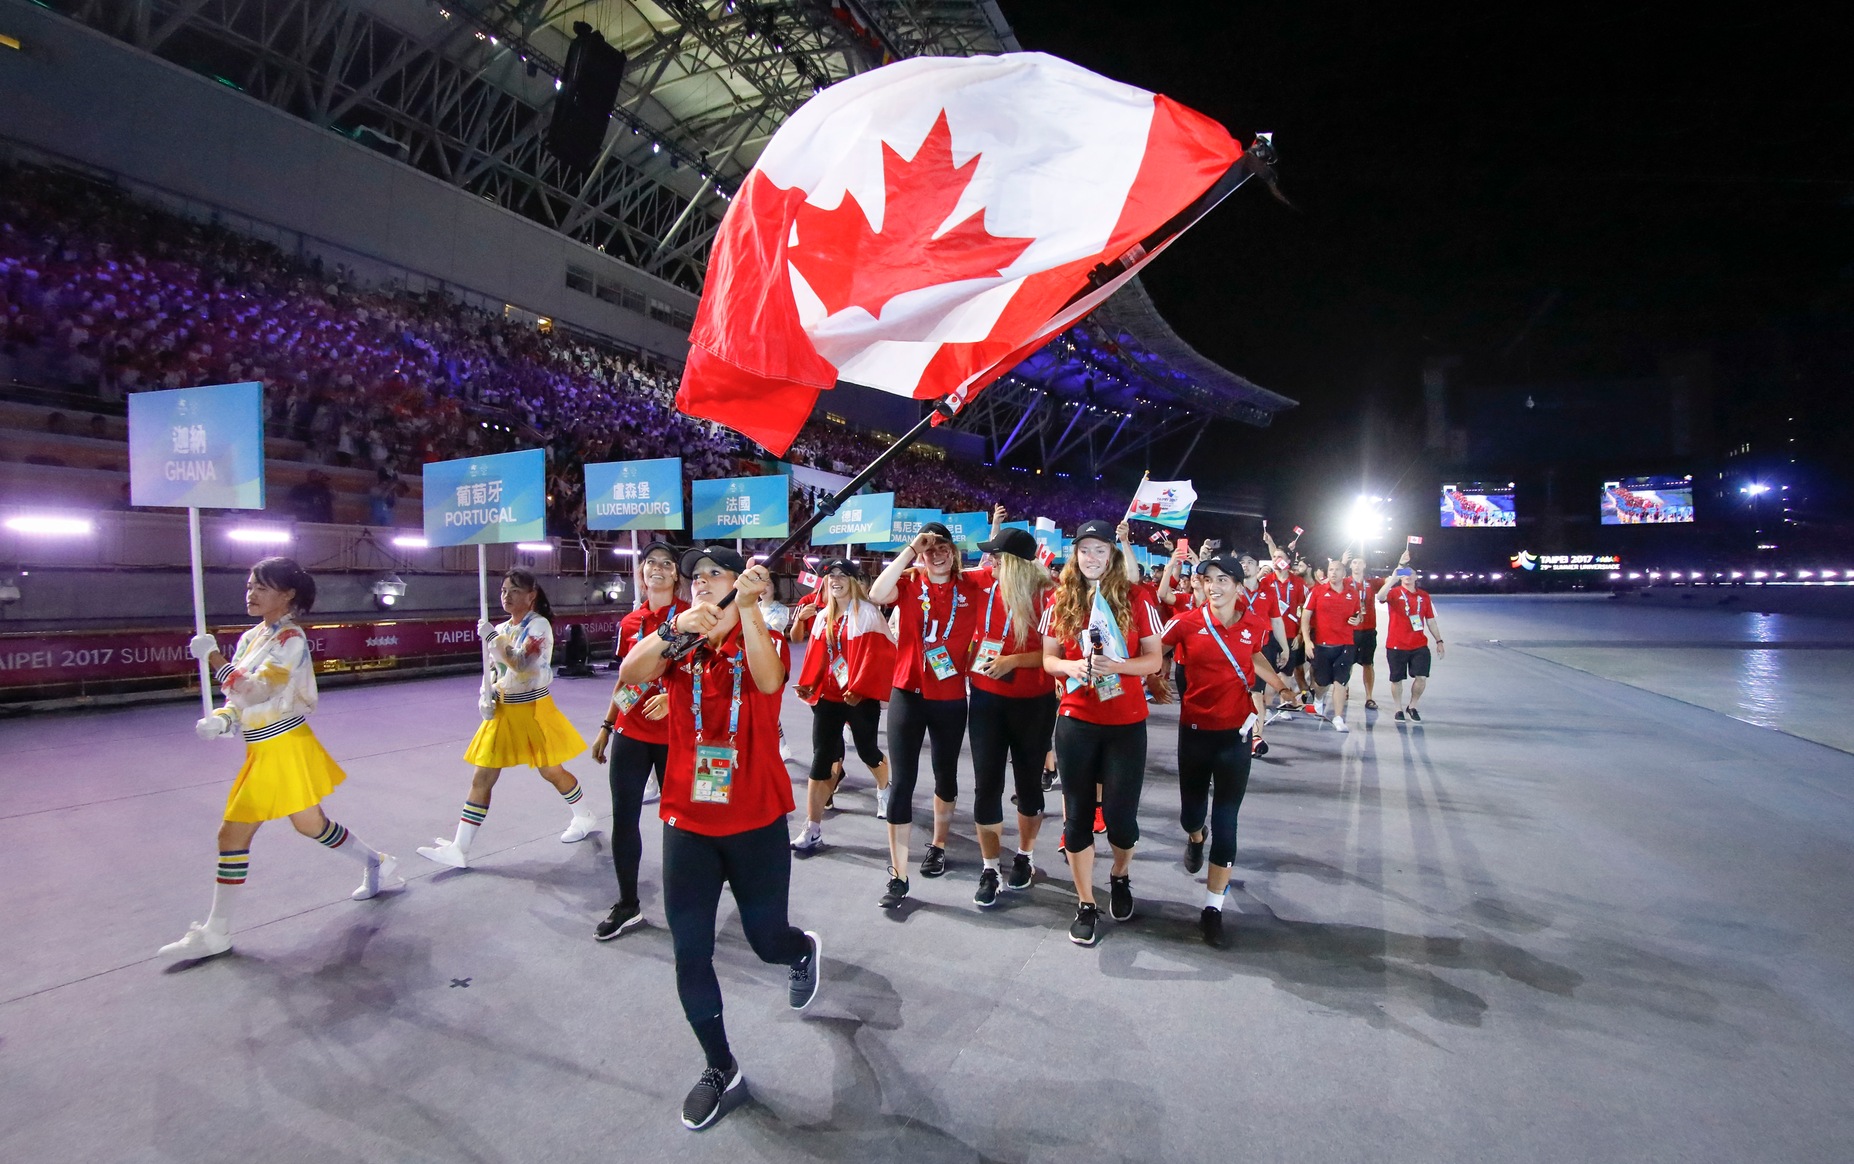 2017 Summer Universiade: Canada marches in Opening Ceremonies in Taipei